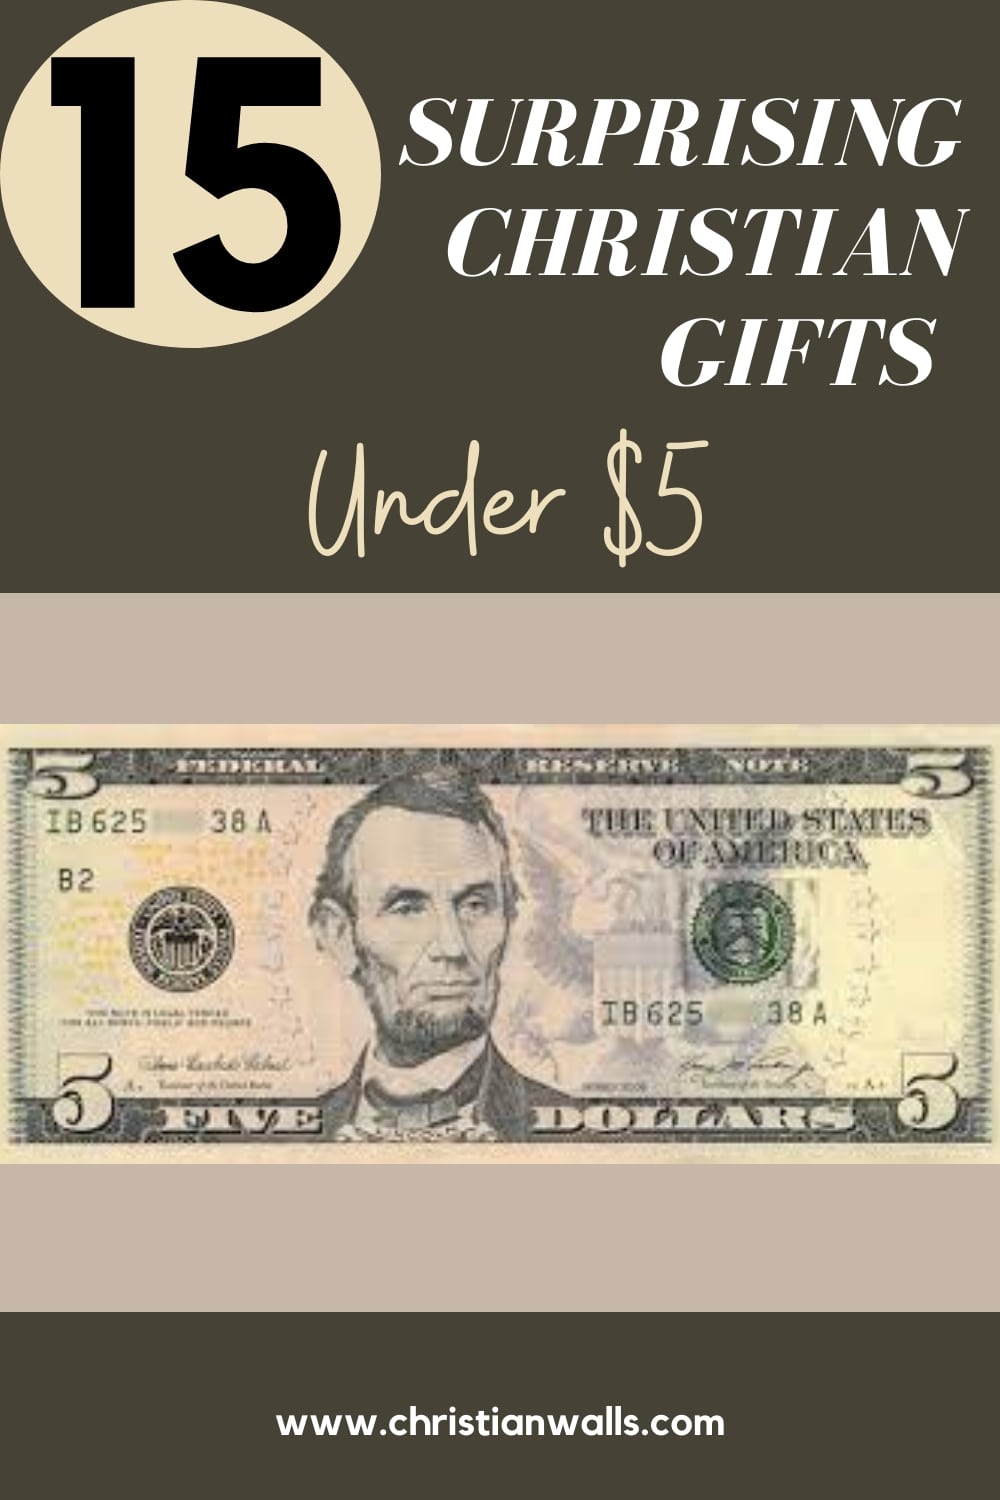 15 Fabulous Last Minute Christmas Gifts For Under $5 - Making